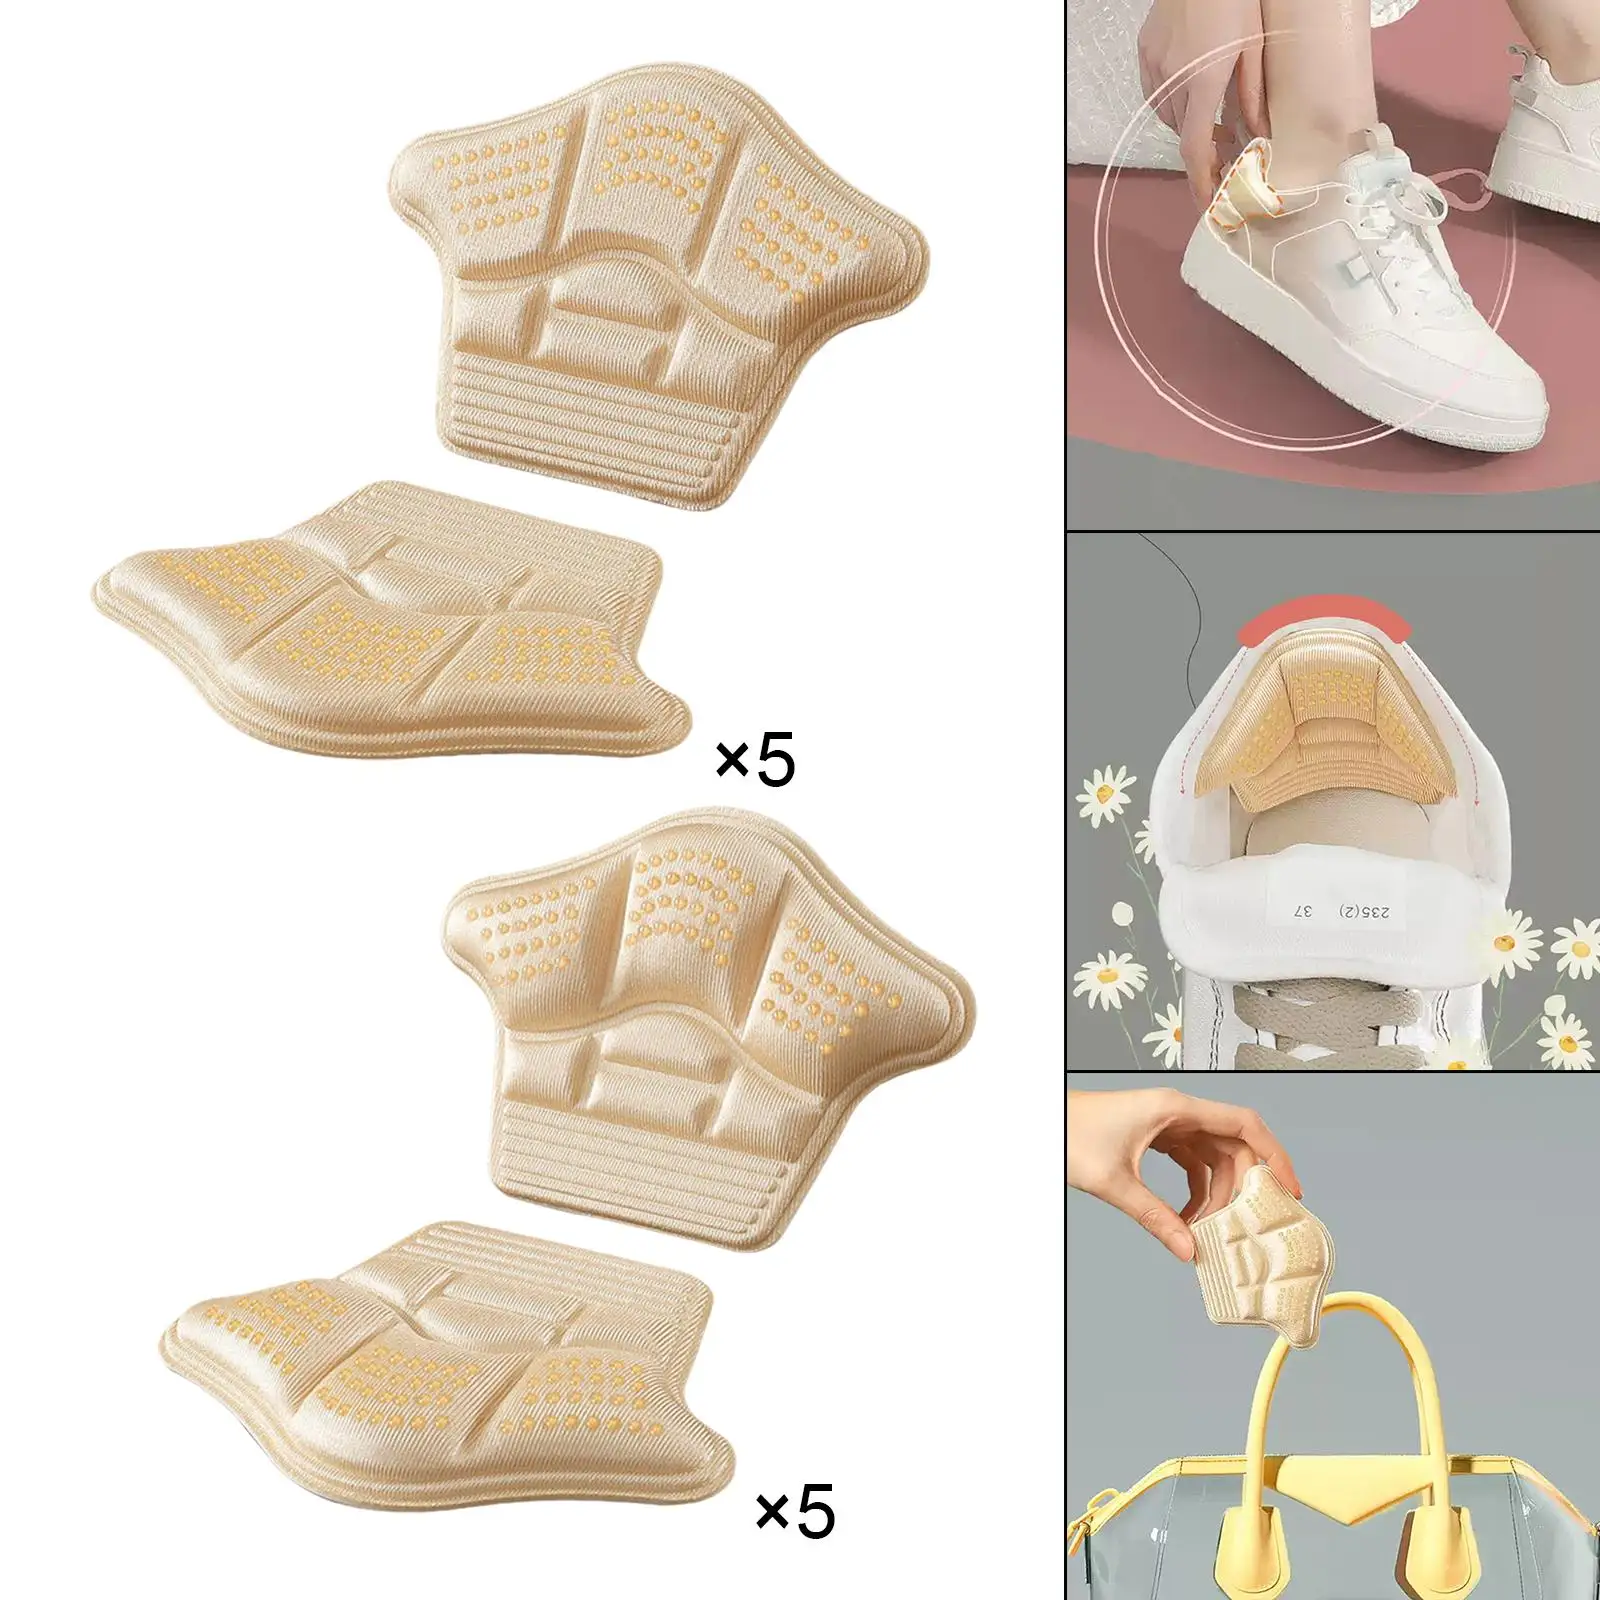 5D Heel Cushion Pads Insoles Foot Care Protector for Preventing Heel Drop